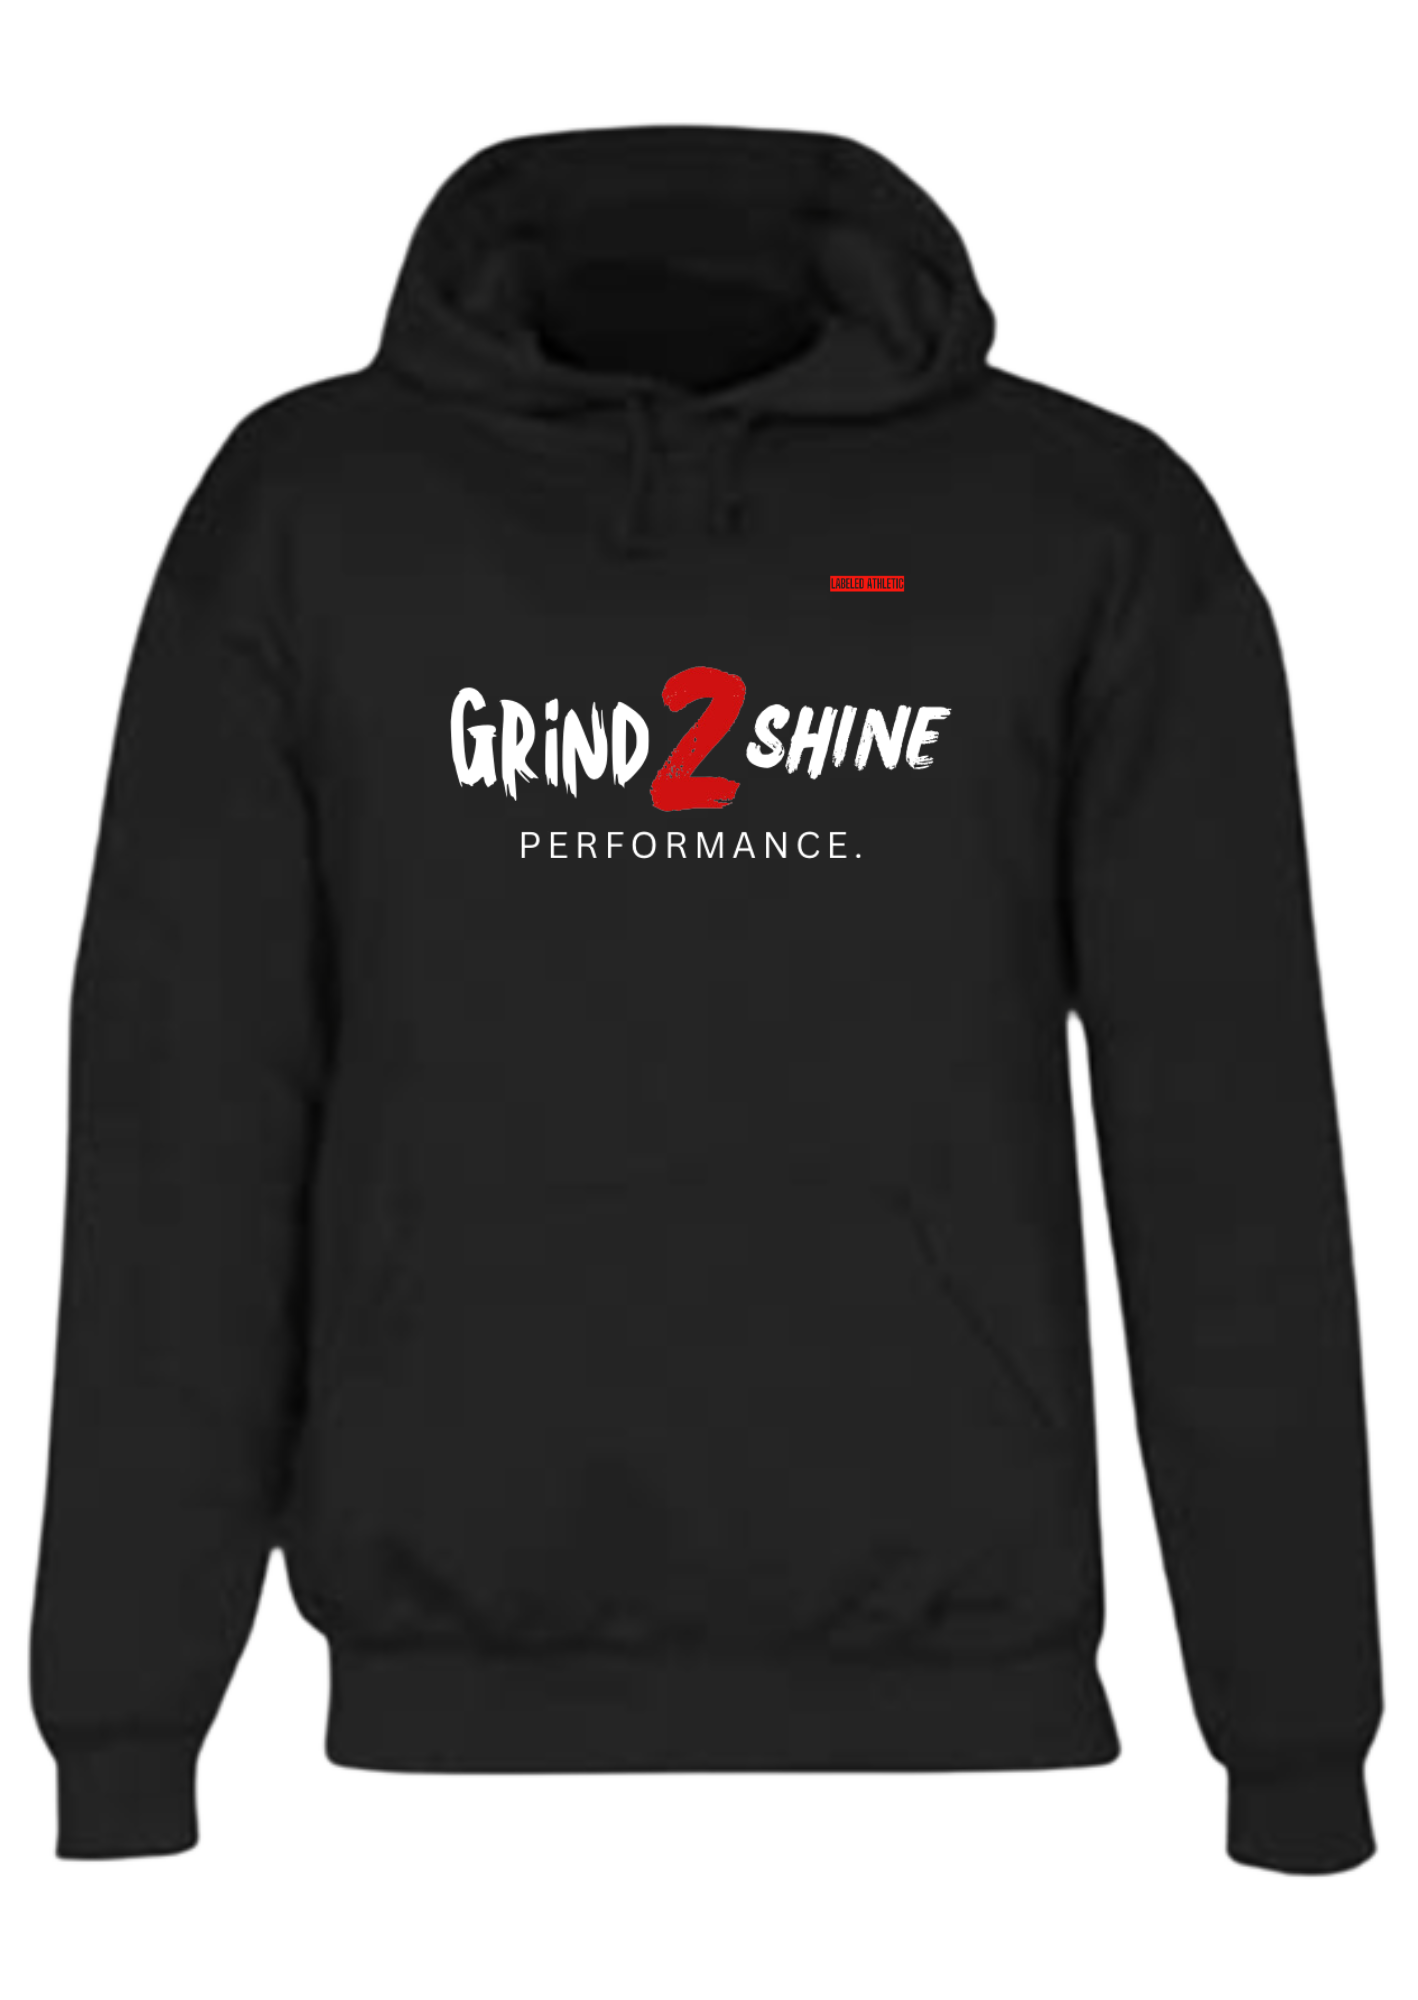 GRIND 2 SHINE f LABELED ATHLETIC HOODIE | BLK/WHT/RED